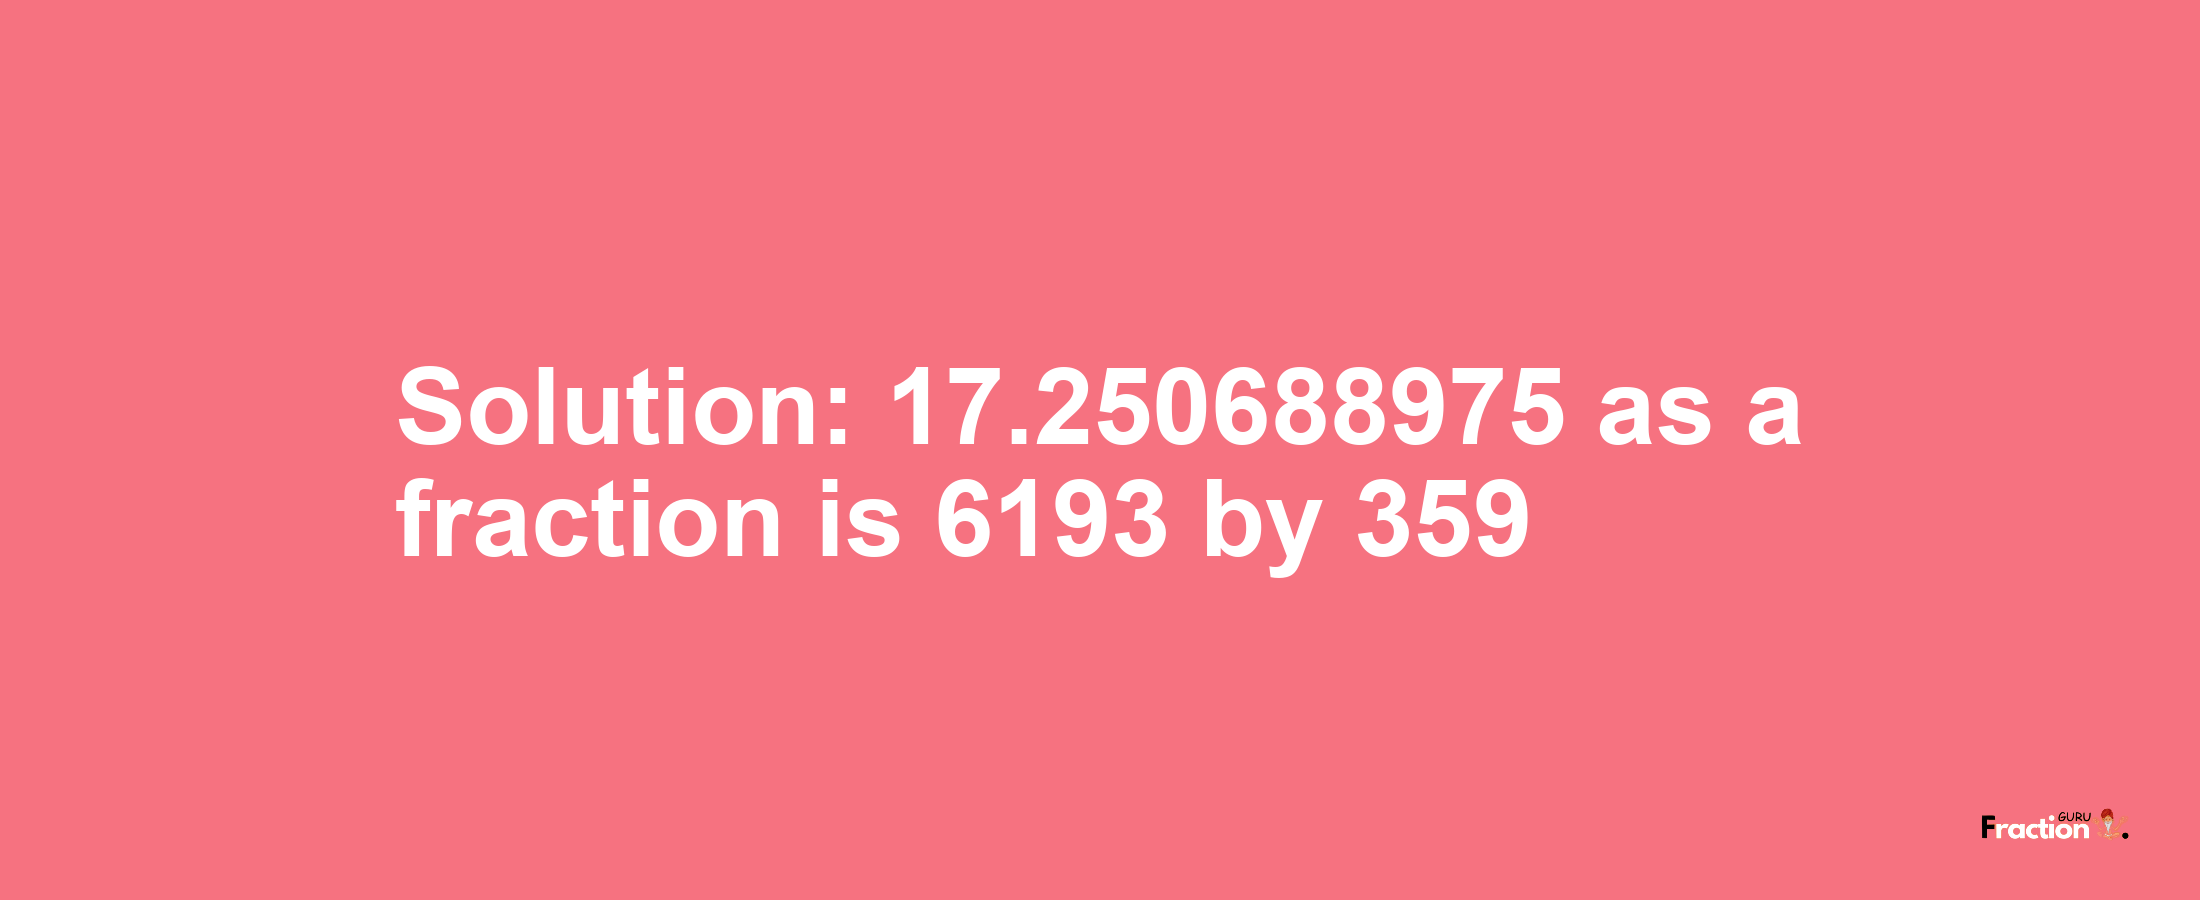 Solution:17.250688975 as a fraction is 6193/359